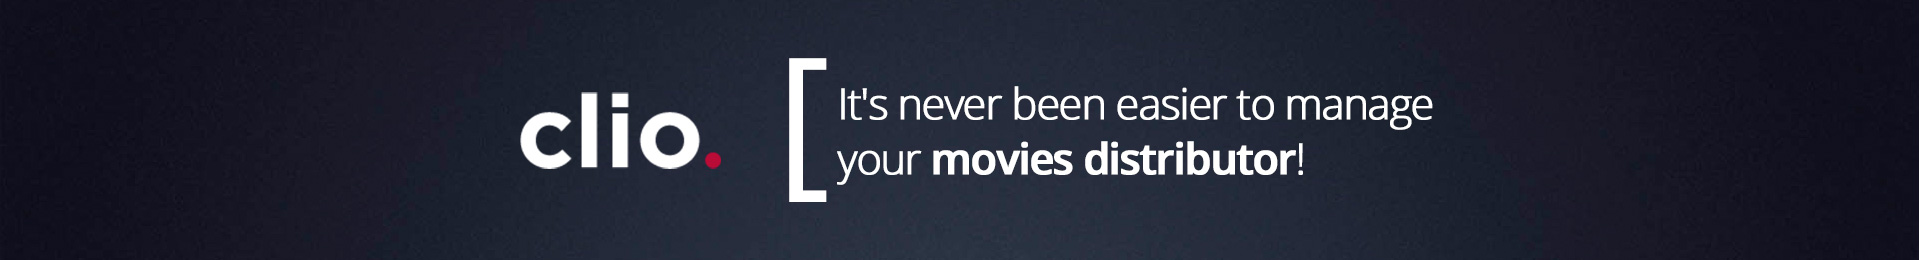 Clio - Its never been easier to manage your movies distributor!